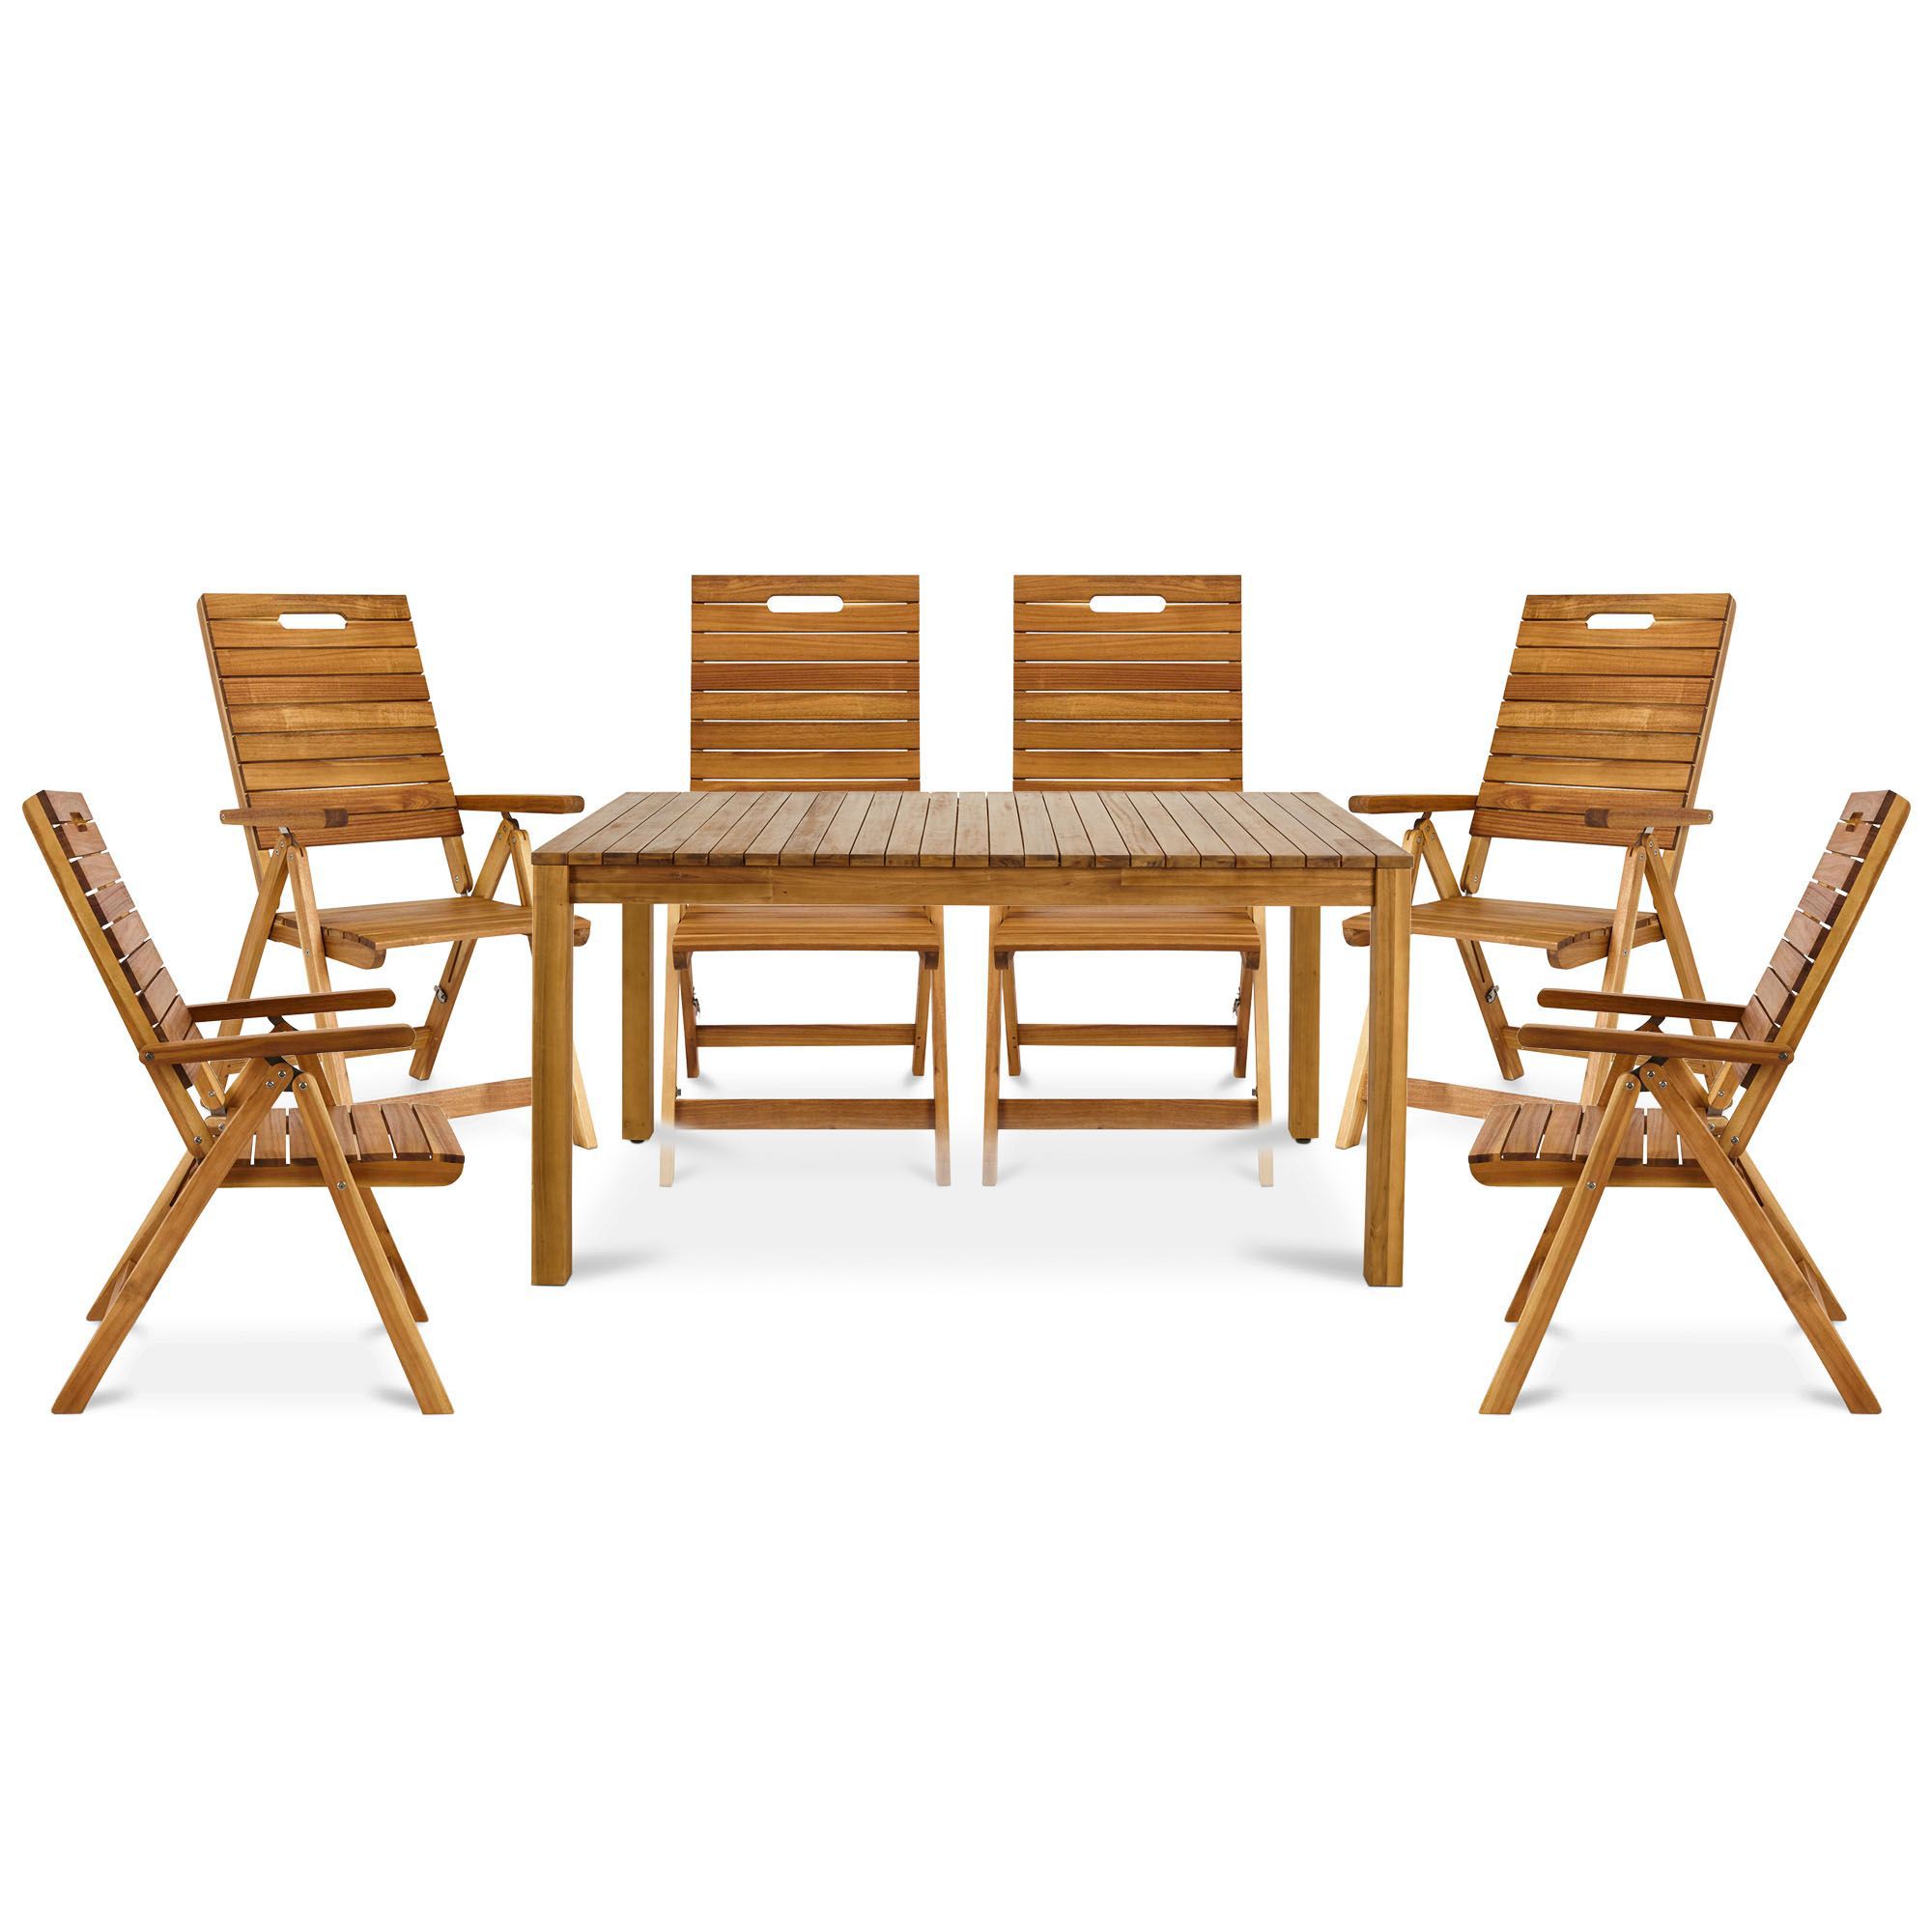 Denia Wooden 6 seater Dining set with Recliner chairs | Departments